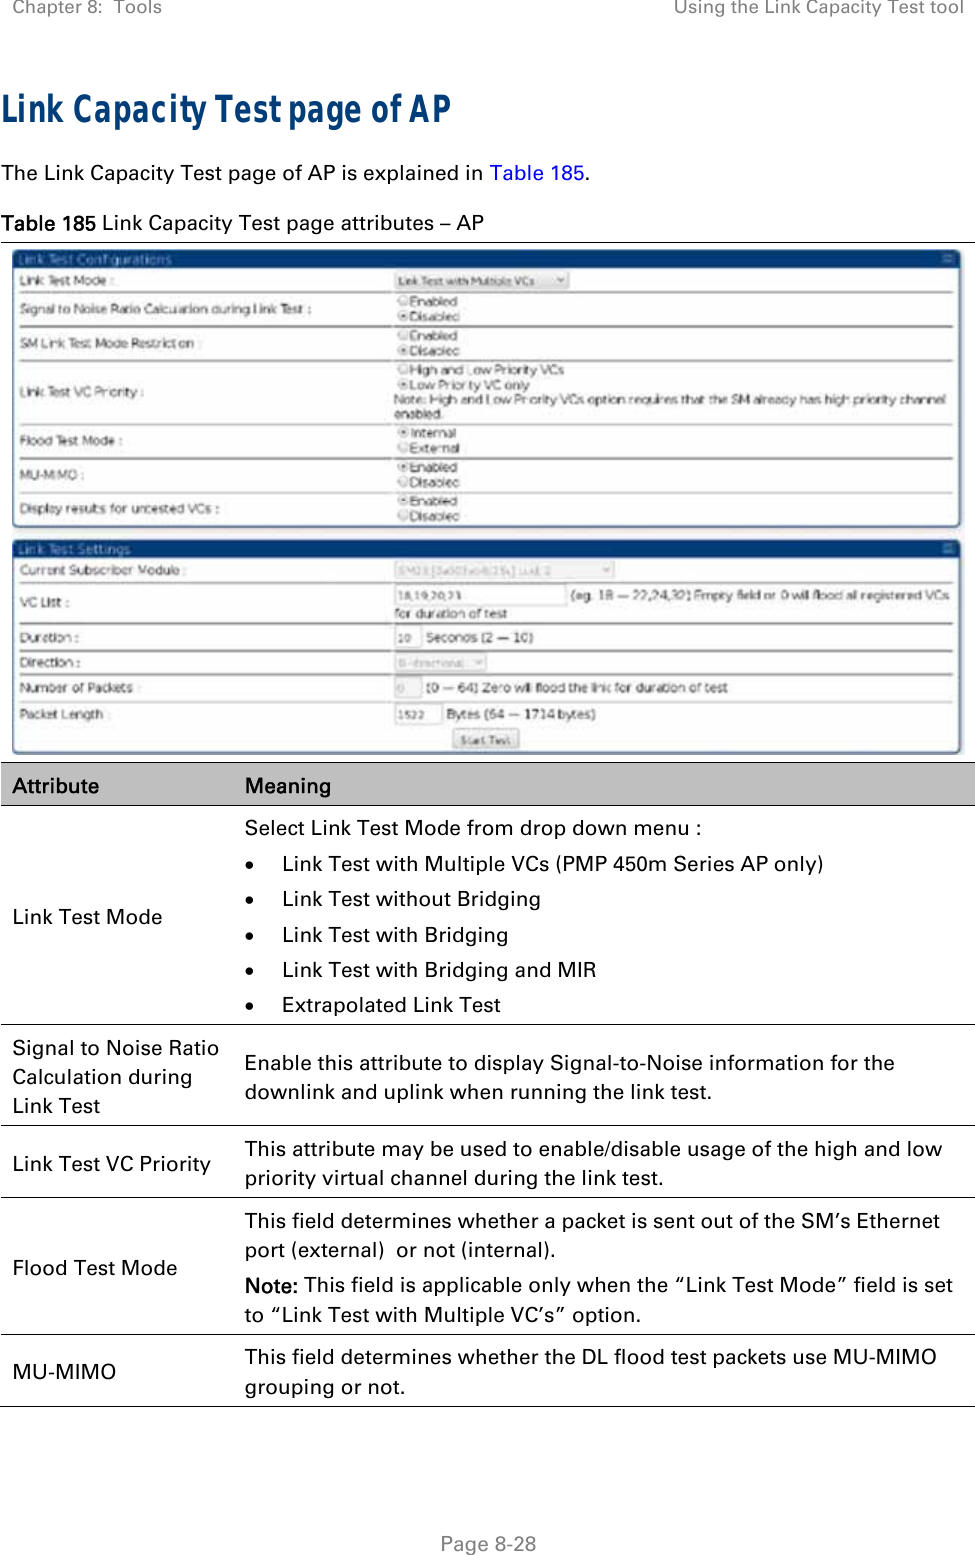 Chapter 8:  Tools  Using the Link Capacity Test tool   Page 8-28 Link Capacity Test page of AP The Link Capacity Test page of AP is explained in Table 185. Table 185 Link Capacity Test page attributes – AP  Attribute  Meaning Link Test Mode Select Link Test Mode from drop down menu :  Link Test with Multiple VCs (PMP 450m Series AP only)  Link Test without Bridging  Link Test with Bridging  Link Test with Bridging and MIR   Extrapolated Link Test Signal to Noise Ratio Calculation during Link Test Enable this attribute to display Signal-to-Noise information for the downlink and uplink when running the link test.  Link Test VC Priority  This attribute may be used to enable/disable usage of the high and low priority virtual channel during the link test. Flood Test Mode This field determines whether a packet is sent out of the SM’s Ethernet port (external)  or not (internal).   Note: This field is applicable only when the “Link Test Mode” field is set to “Link Test with Multiple VC’s” option. MU-MIMO  This field determines whether the DL flood test packets use MU-MIMO grouping or not. 